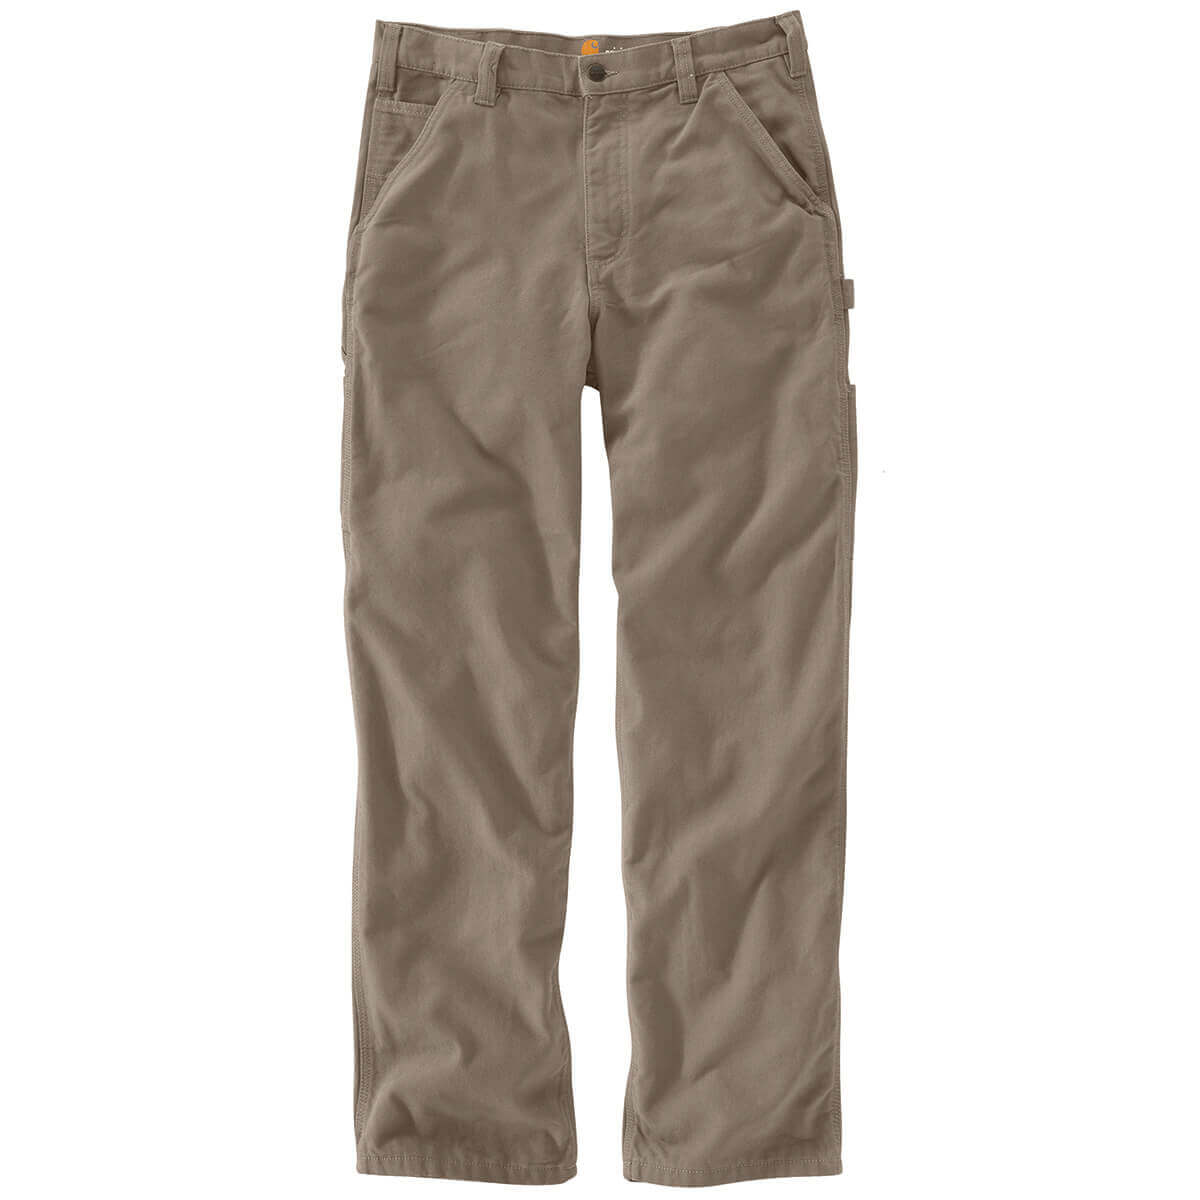 Loose Fit Canvas Utility Work Pant